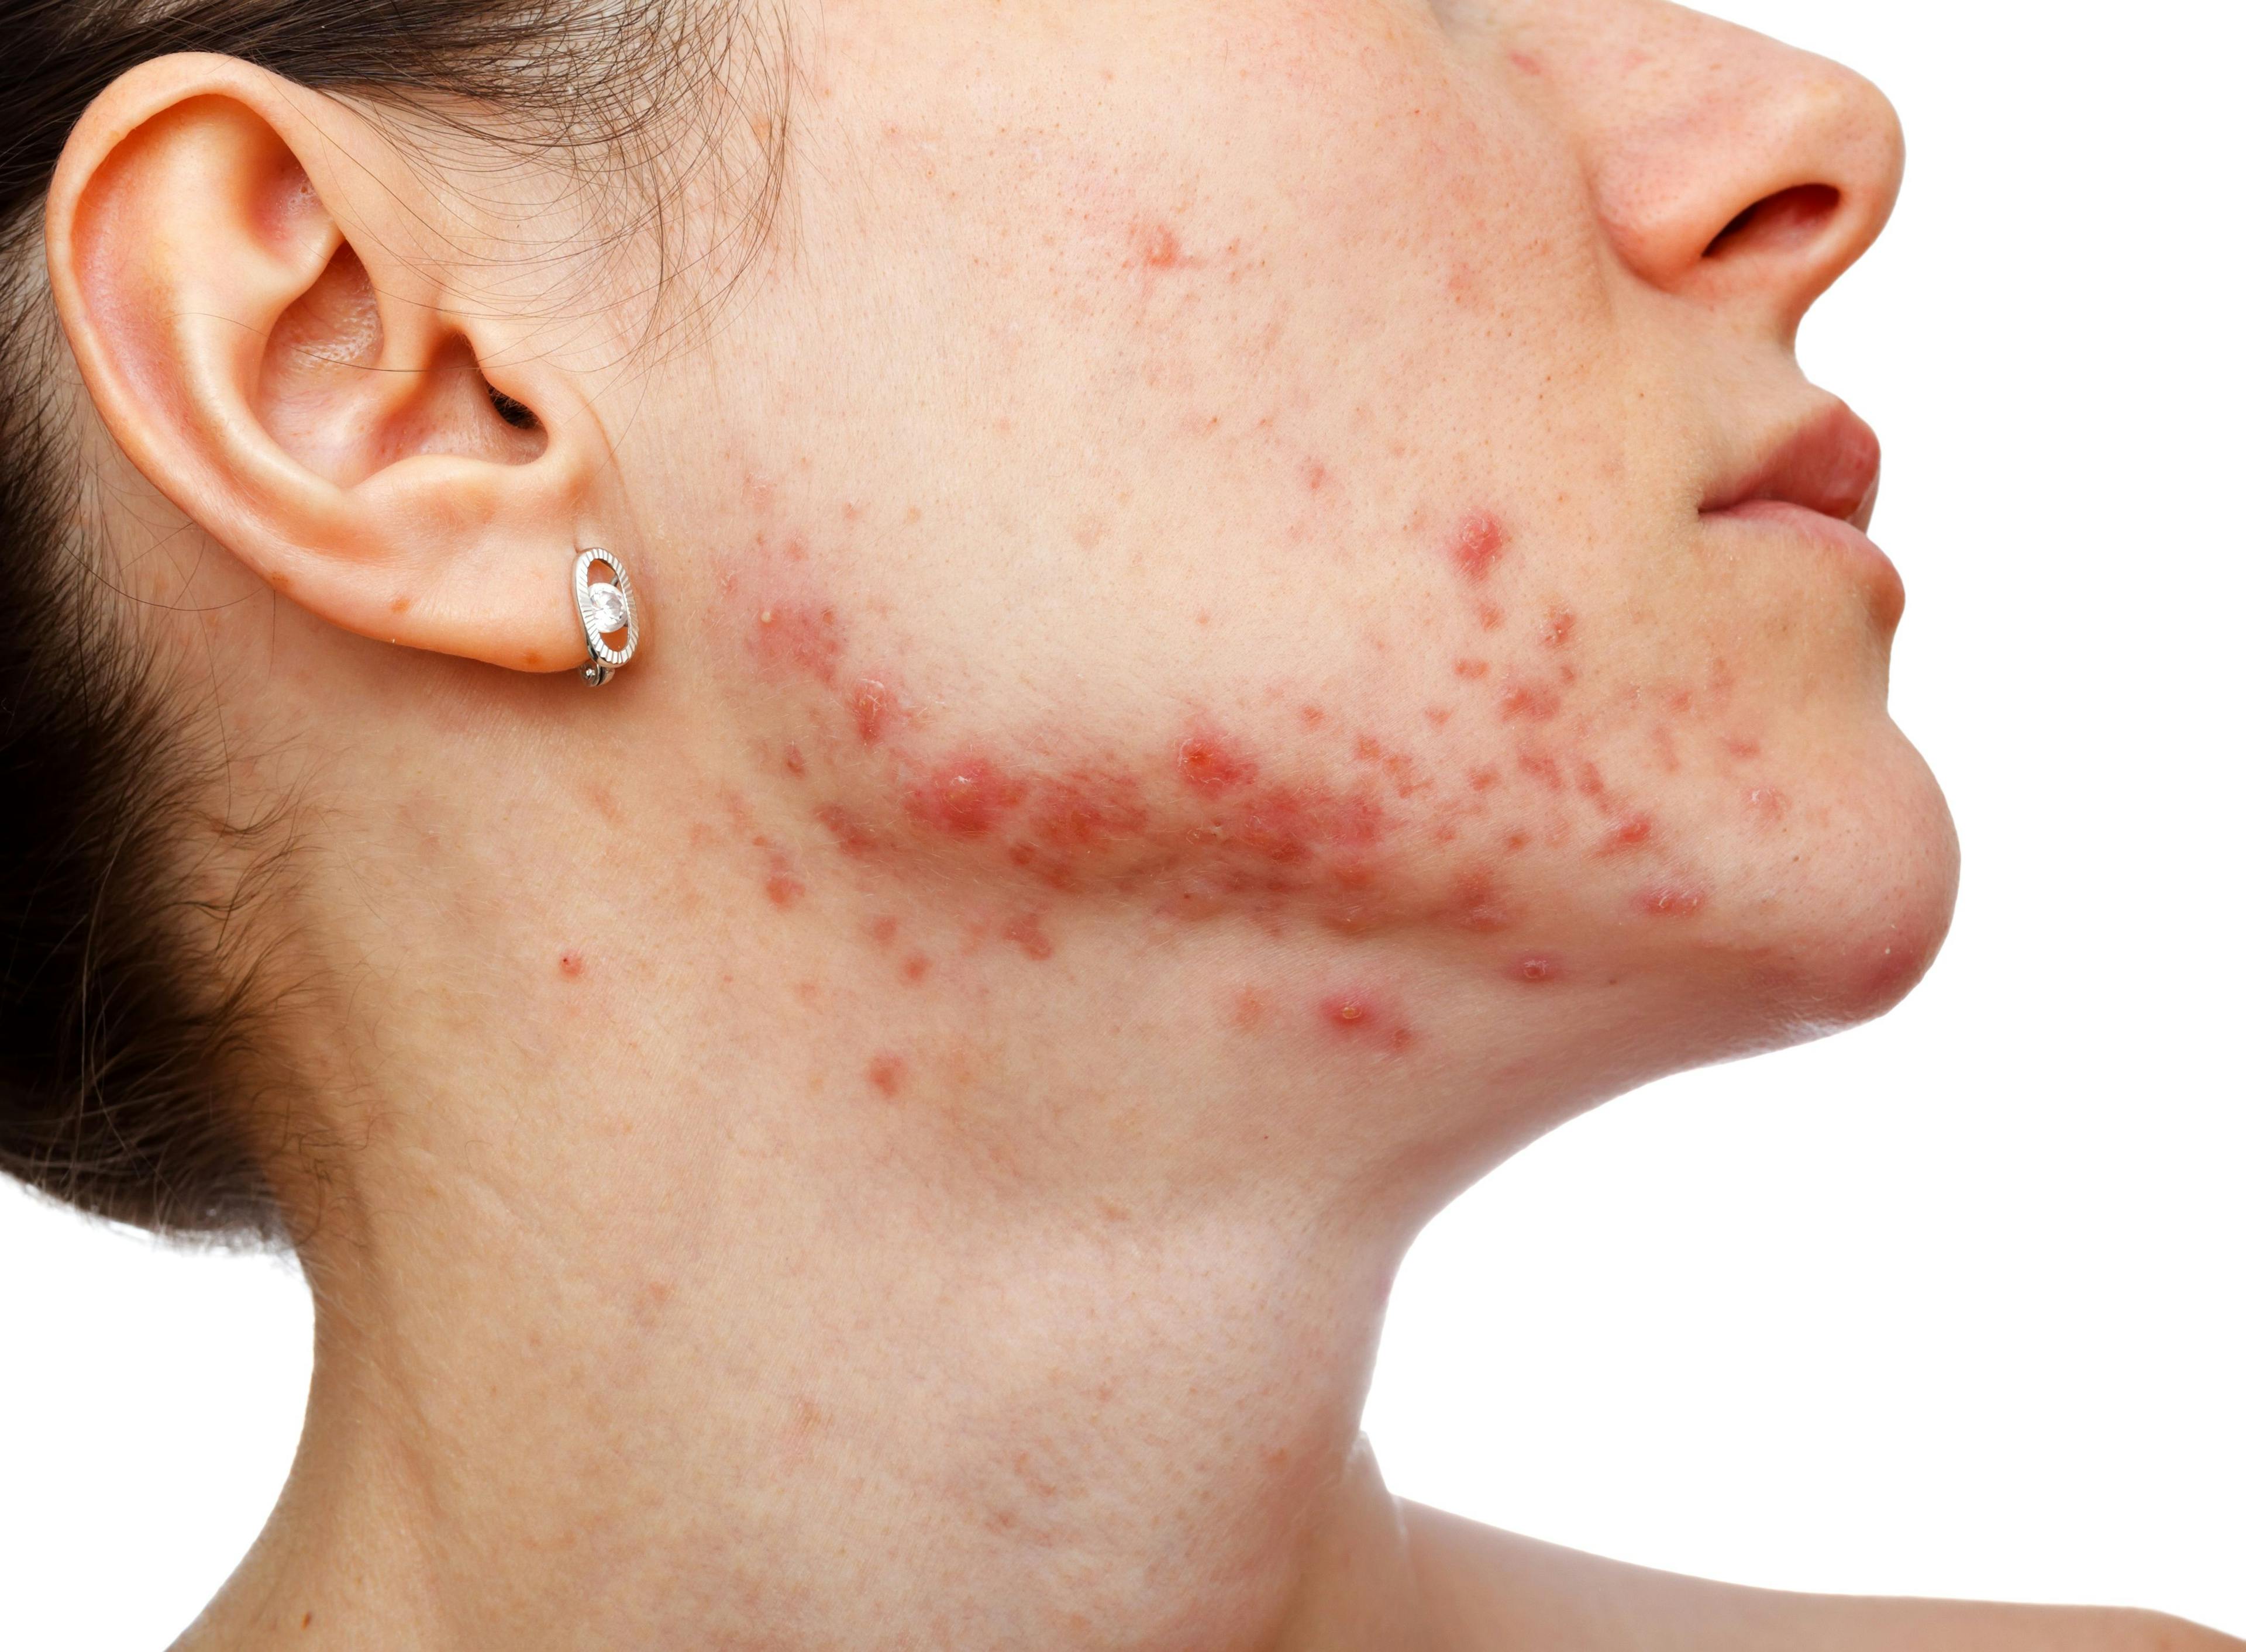 Survey Finds Acne Causes Americans to Miss Out on Important Social Events